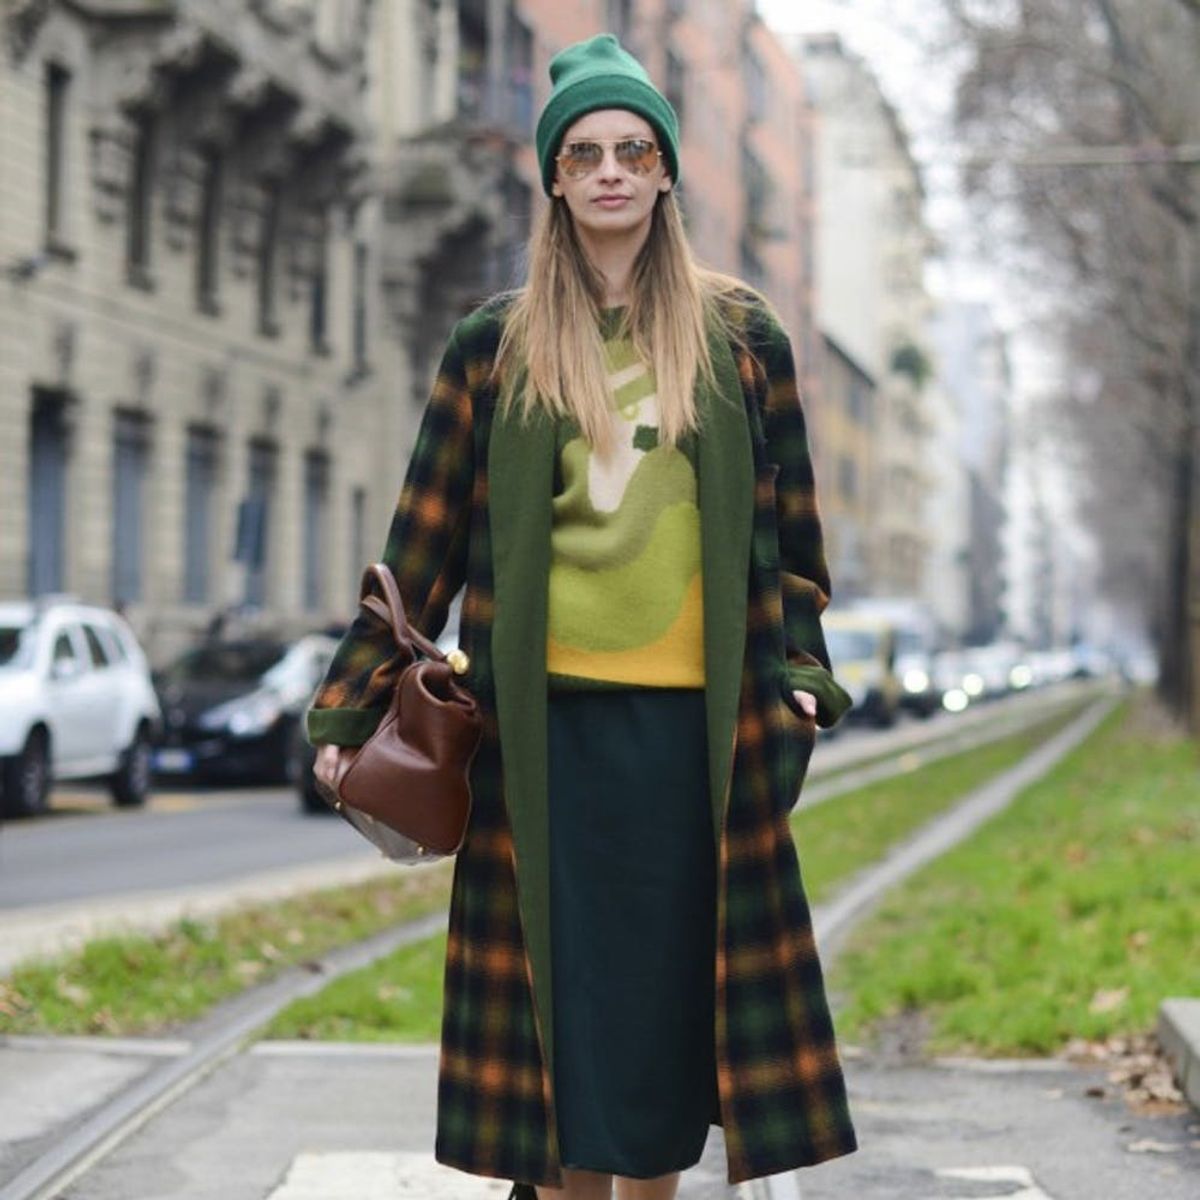 14 Street Style Shots from Milan to Inspire Your Winter Look